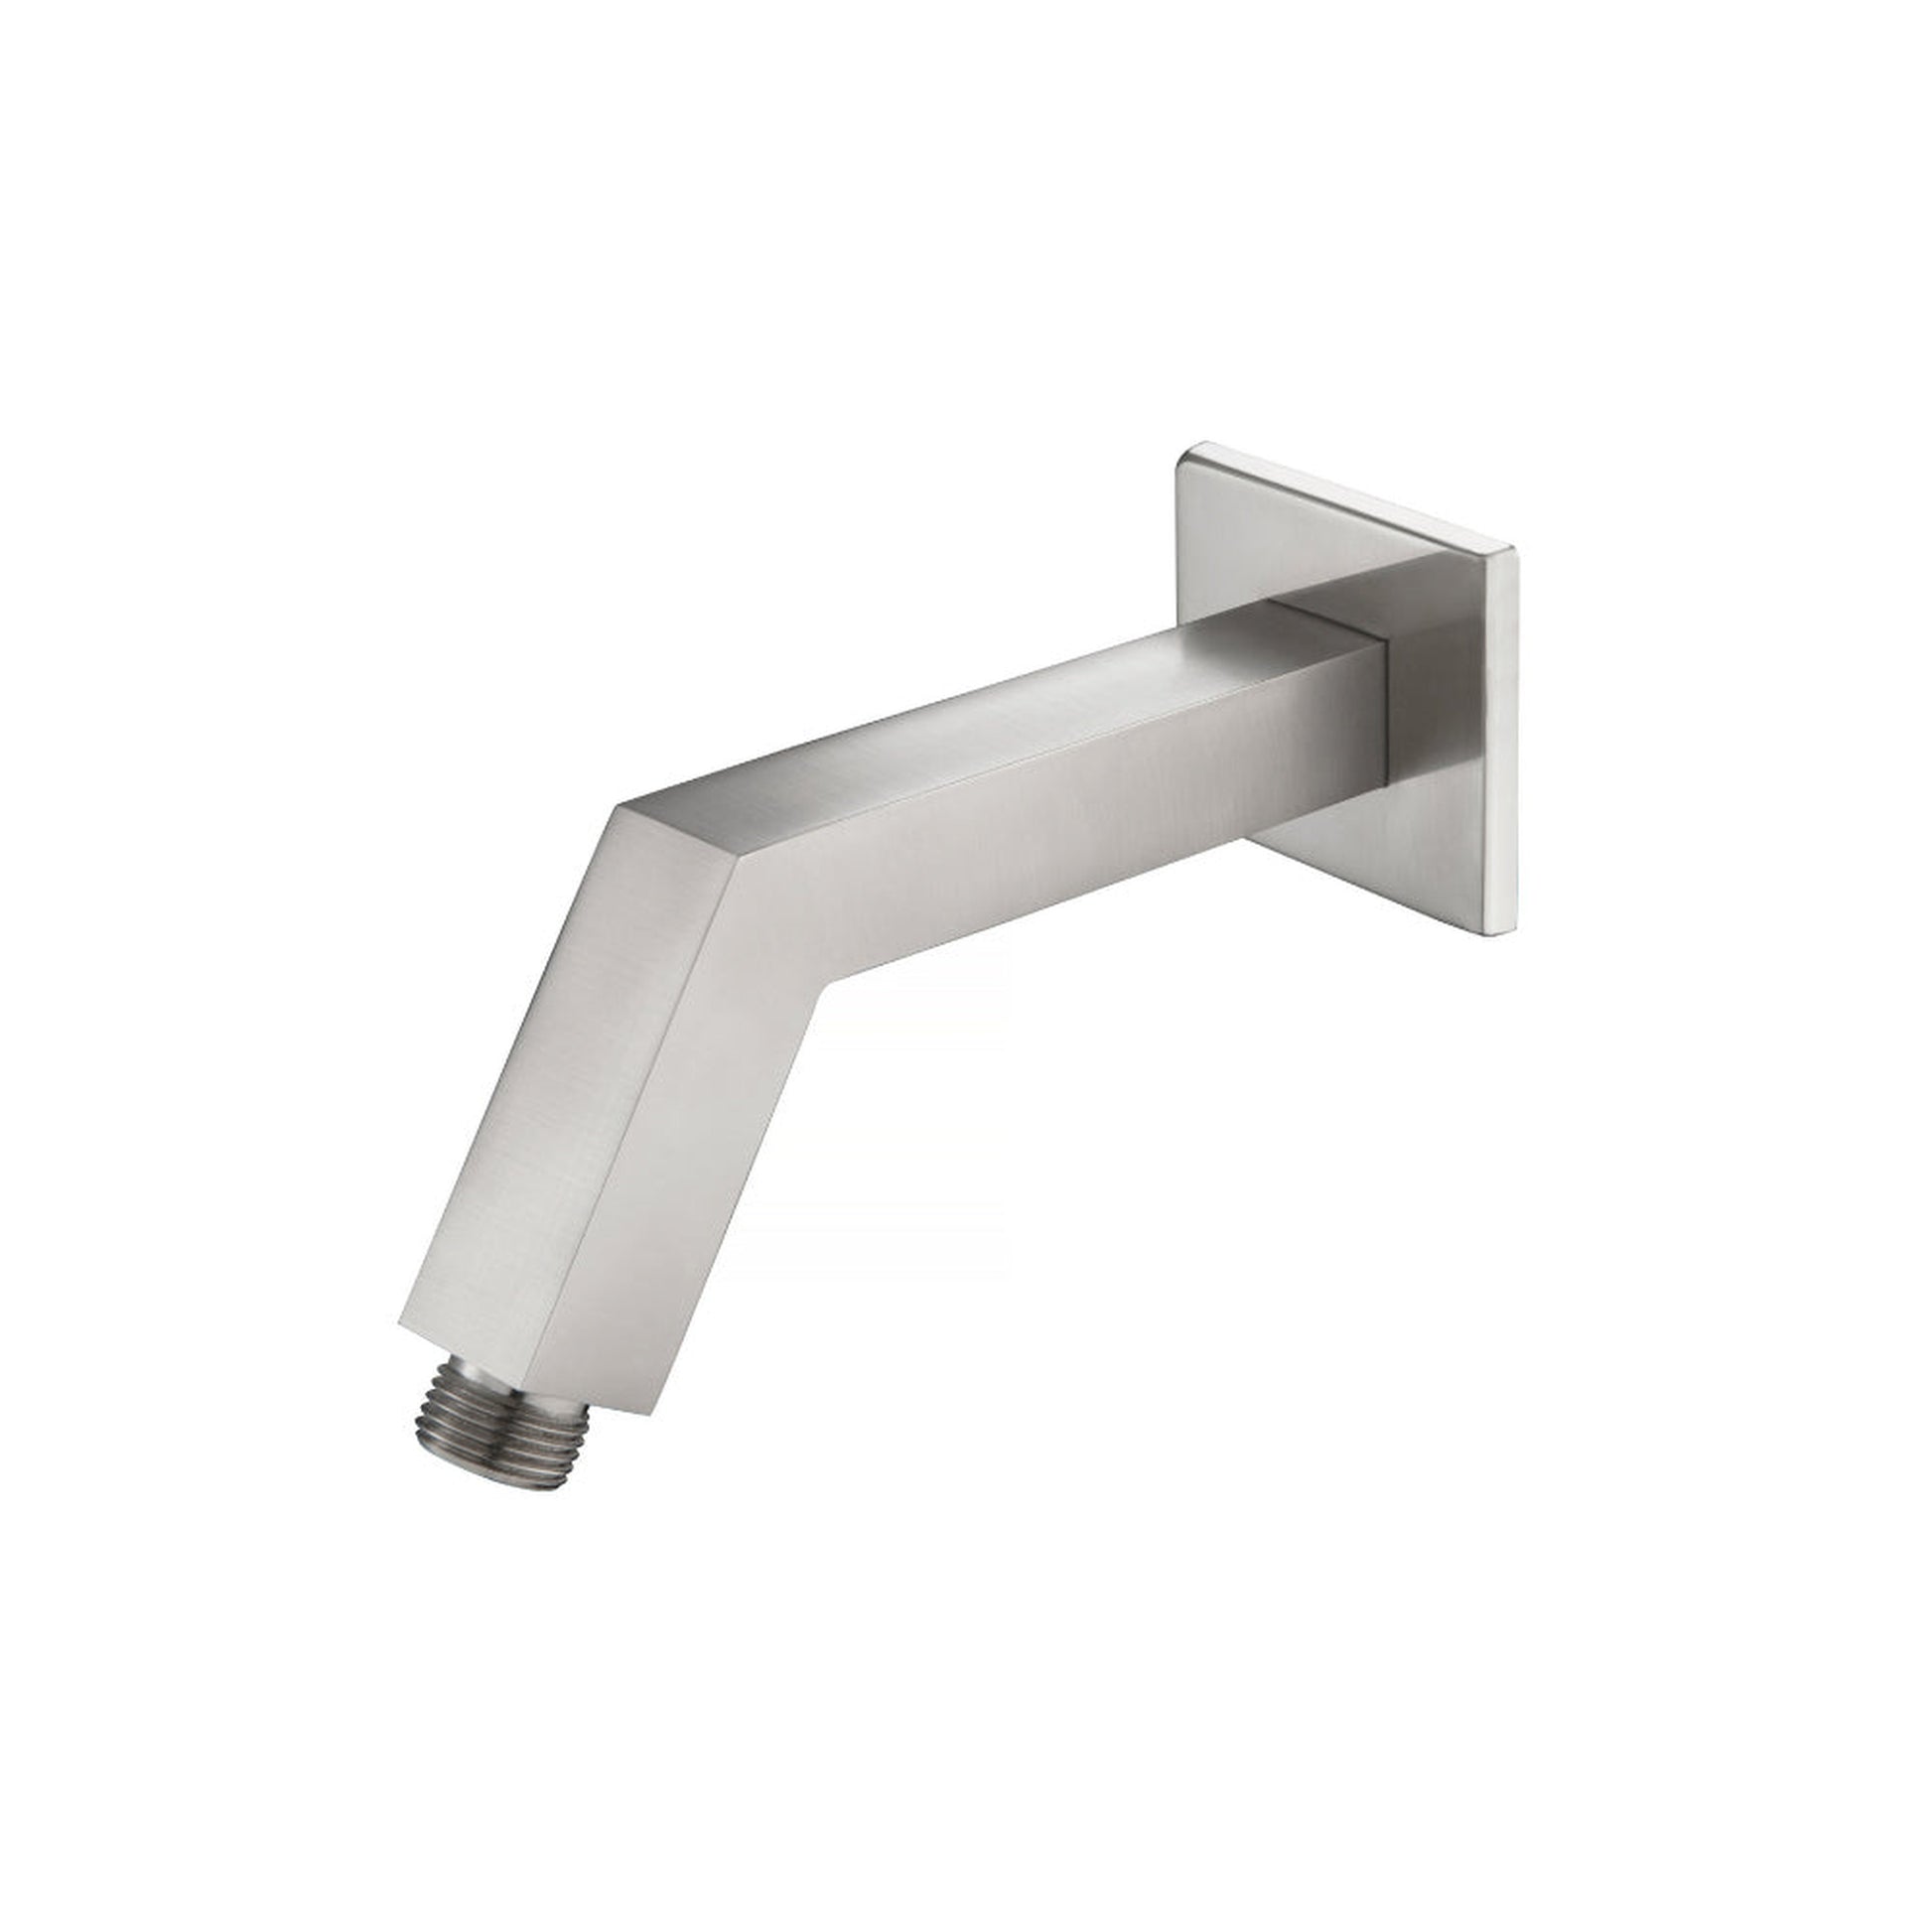 Isenberg Universal Fixtures 7" Brushed Nickel PVD Solid Brass Wall-Mounted Standard Shower Arm With Square Sliding Flange